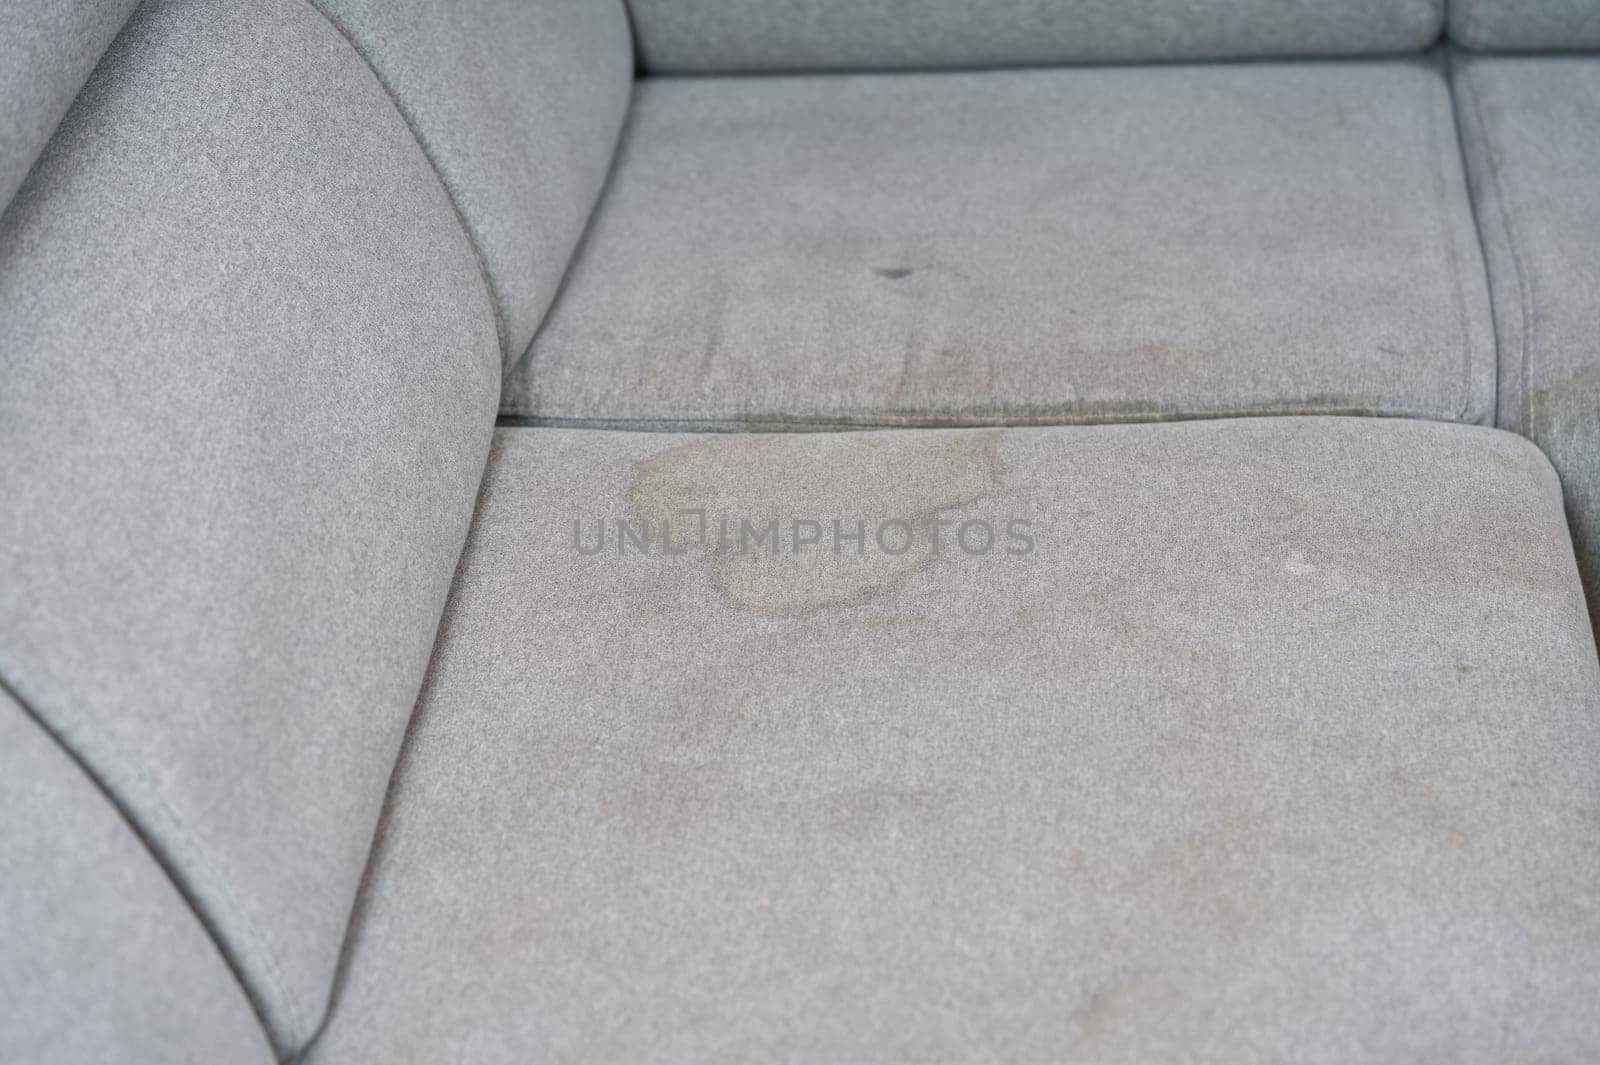 Dirty, stain, blot , fleck of water on the fabric, textile sofa. Dirty textile sofa chemical cleaning Dirty textile sofa chemical cleaning. upholstered furniture cleaning concept